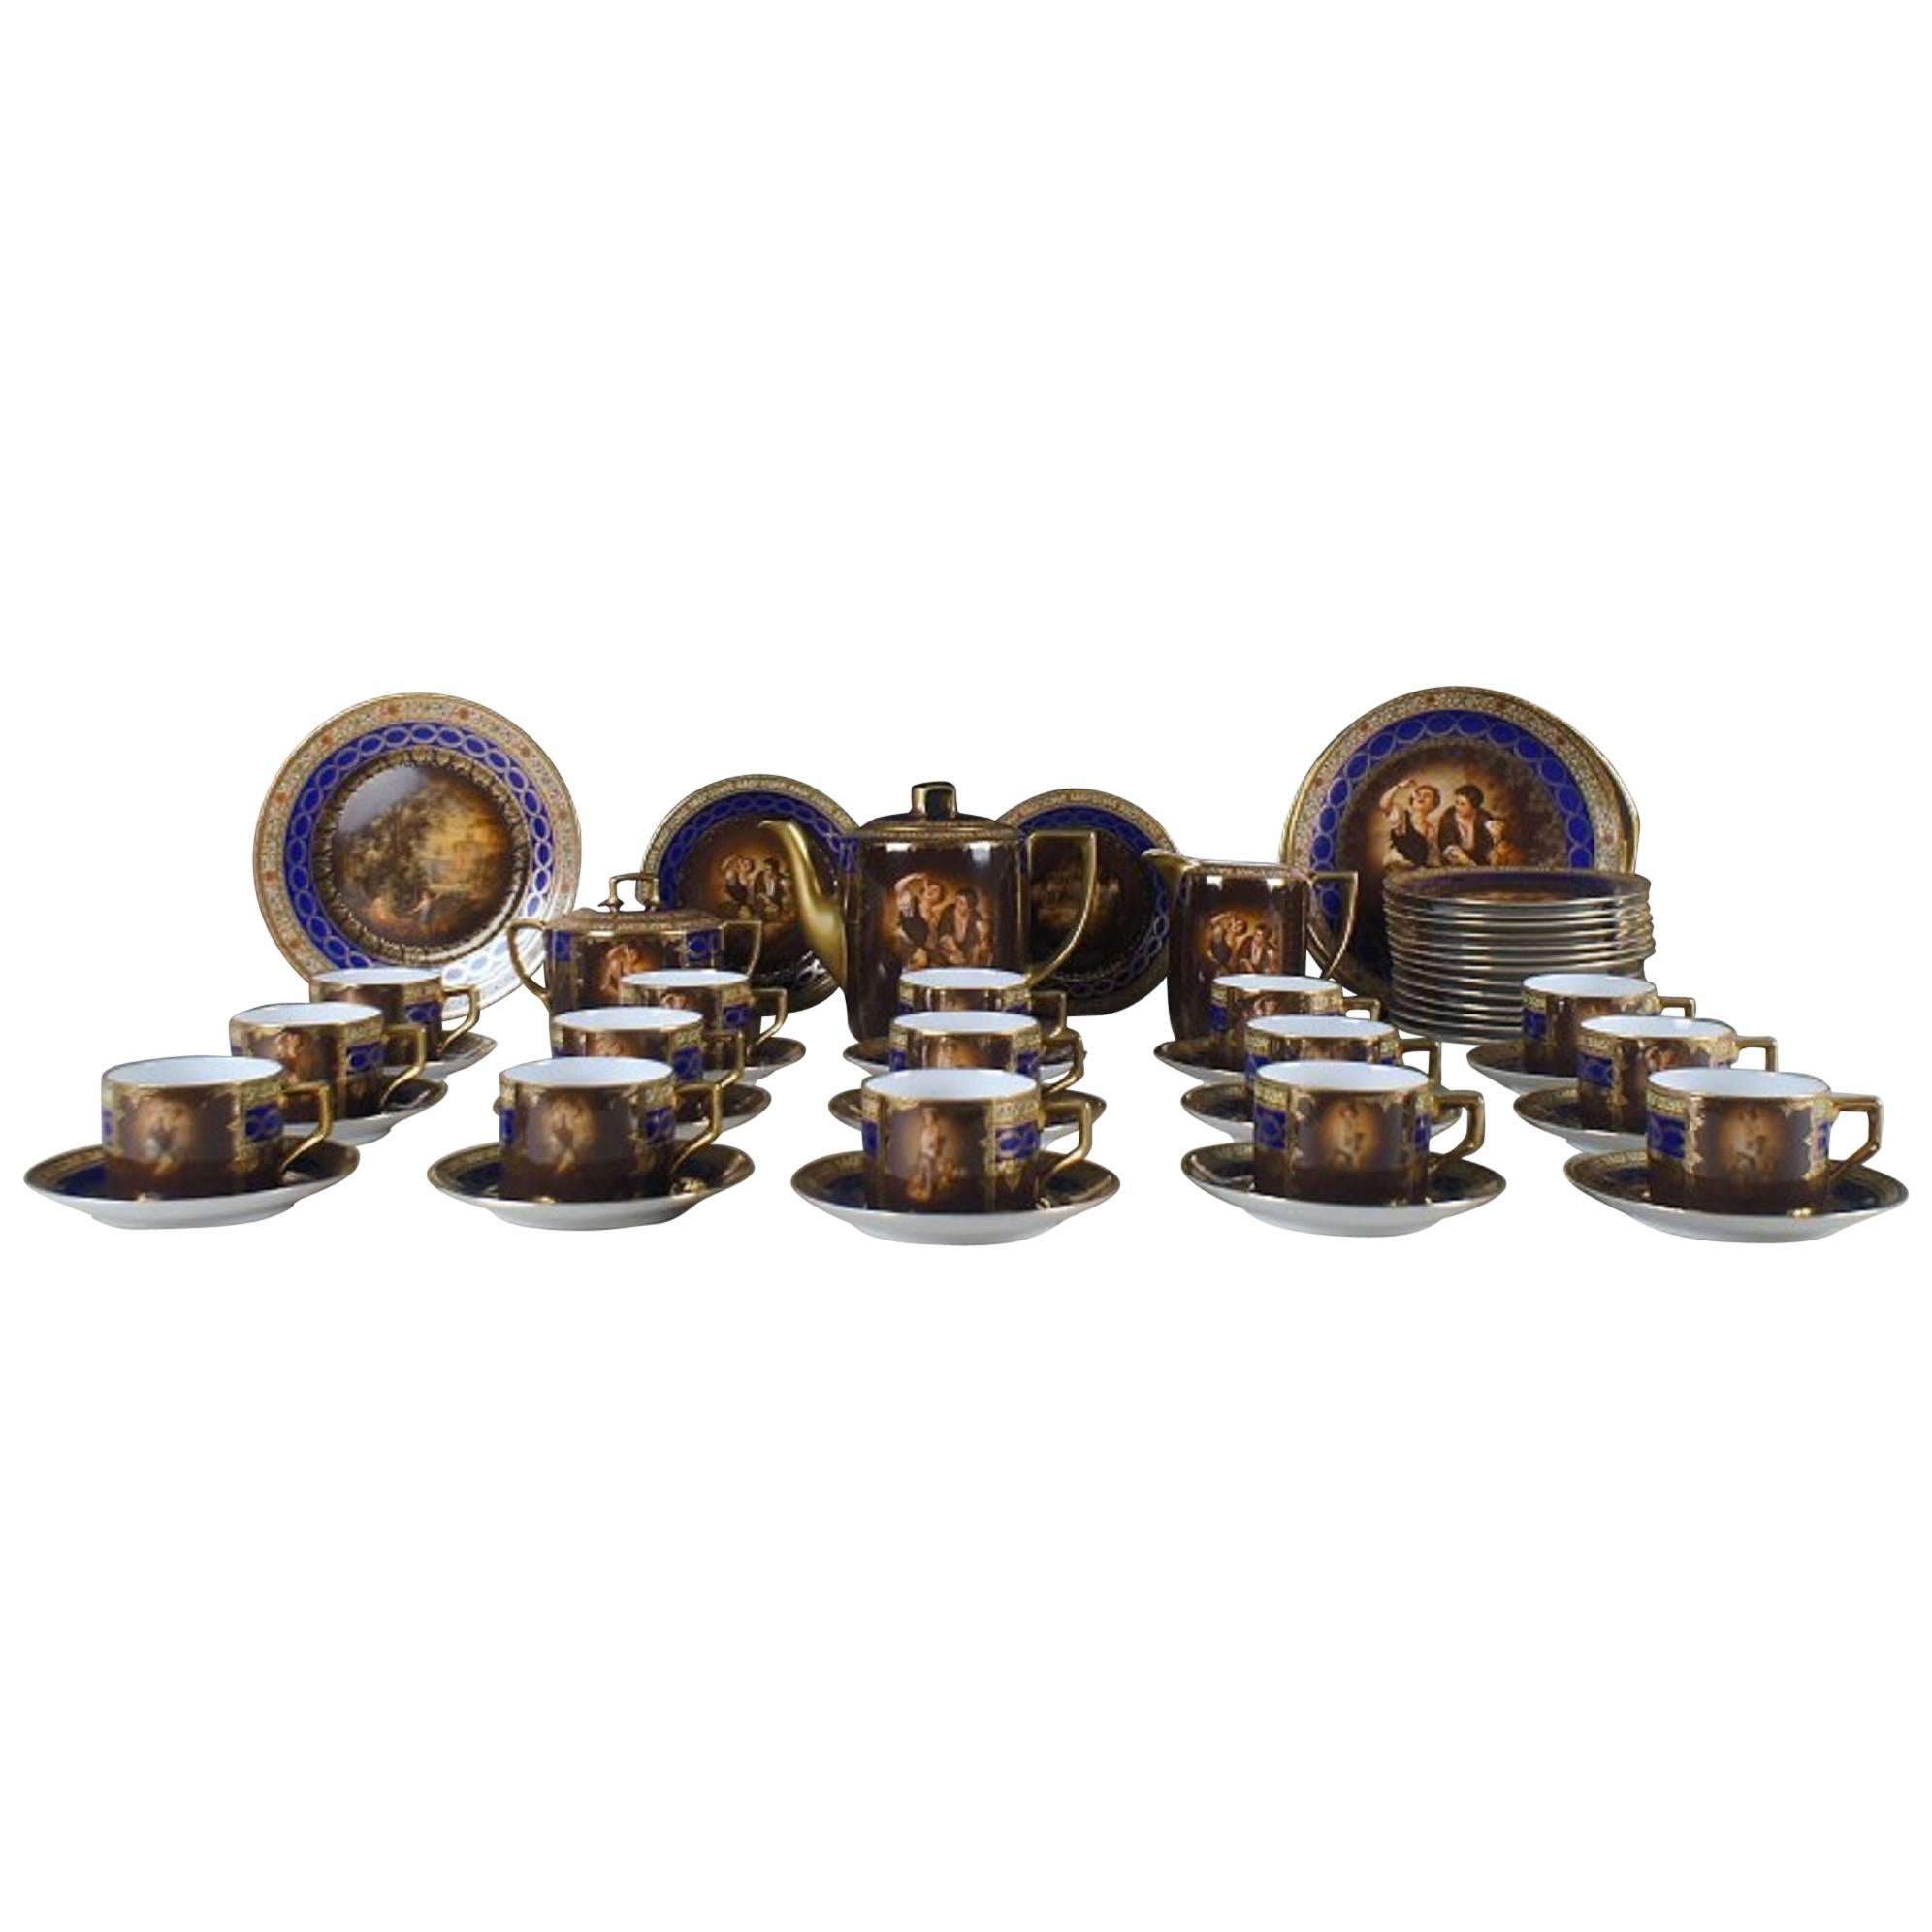 Large Vienna, 15 Persons Coffee Service, circa 1930s-1940s